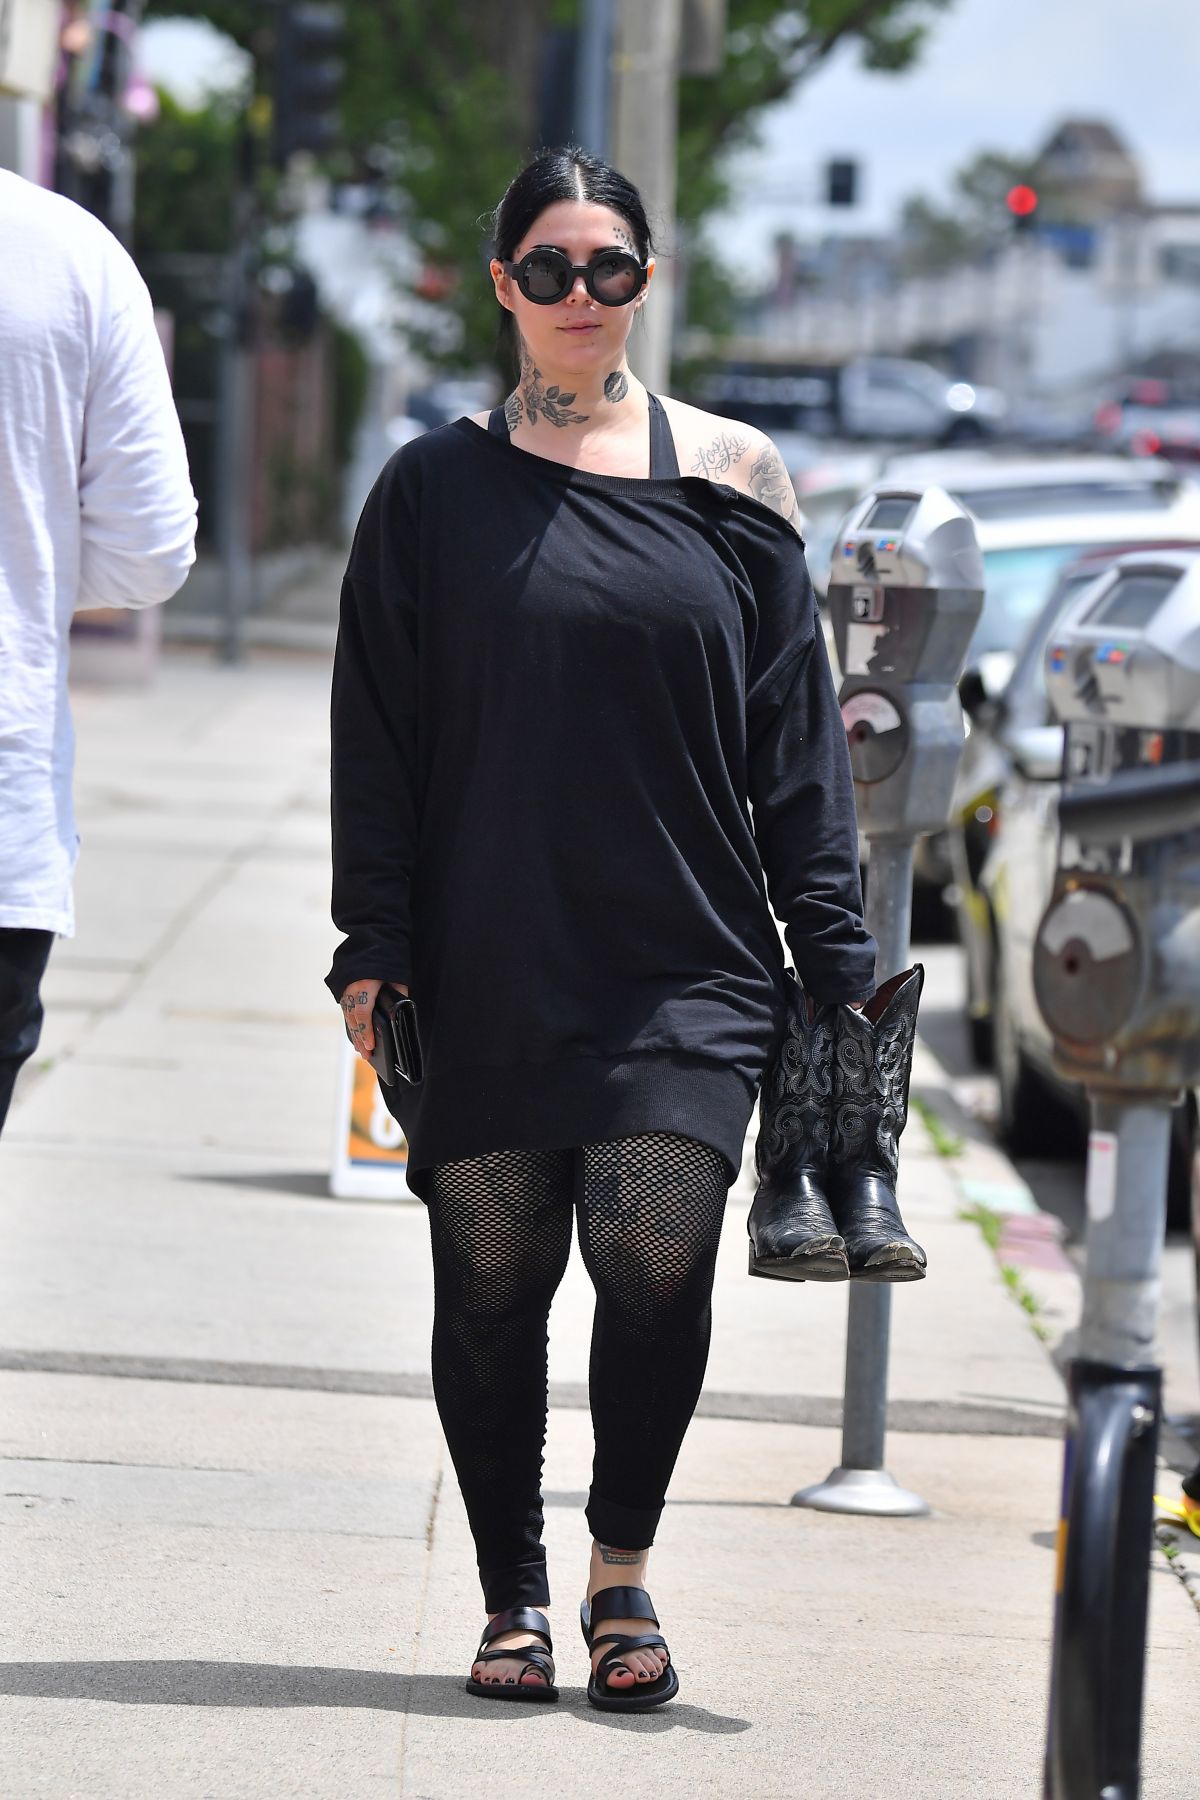 Pregnant KT VON D Out in West Hollywood 04/29/2019 – HawtCelebs